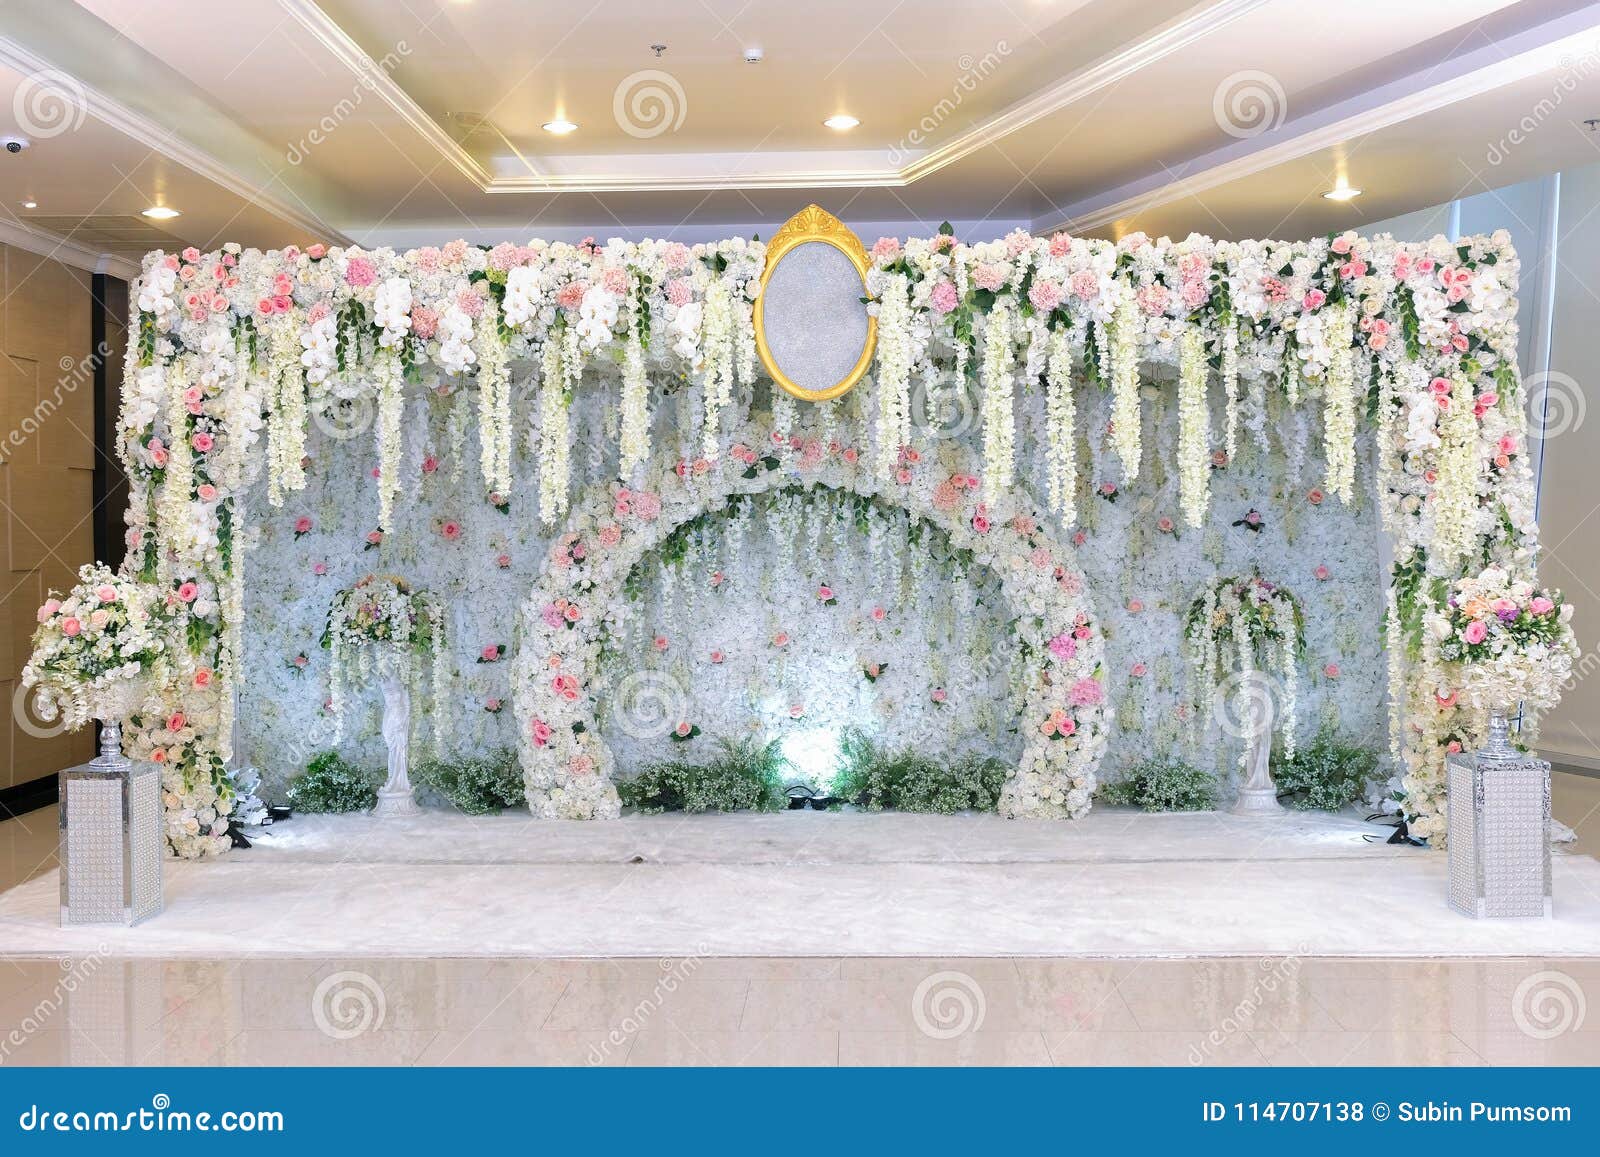 Wedding Arch and Wedding Background. Stock Photo - Image of love, dinner:  114707138